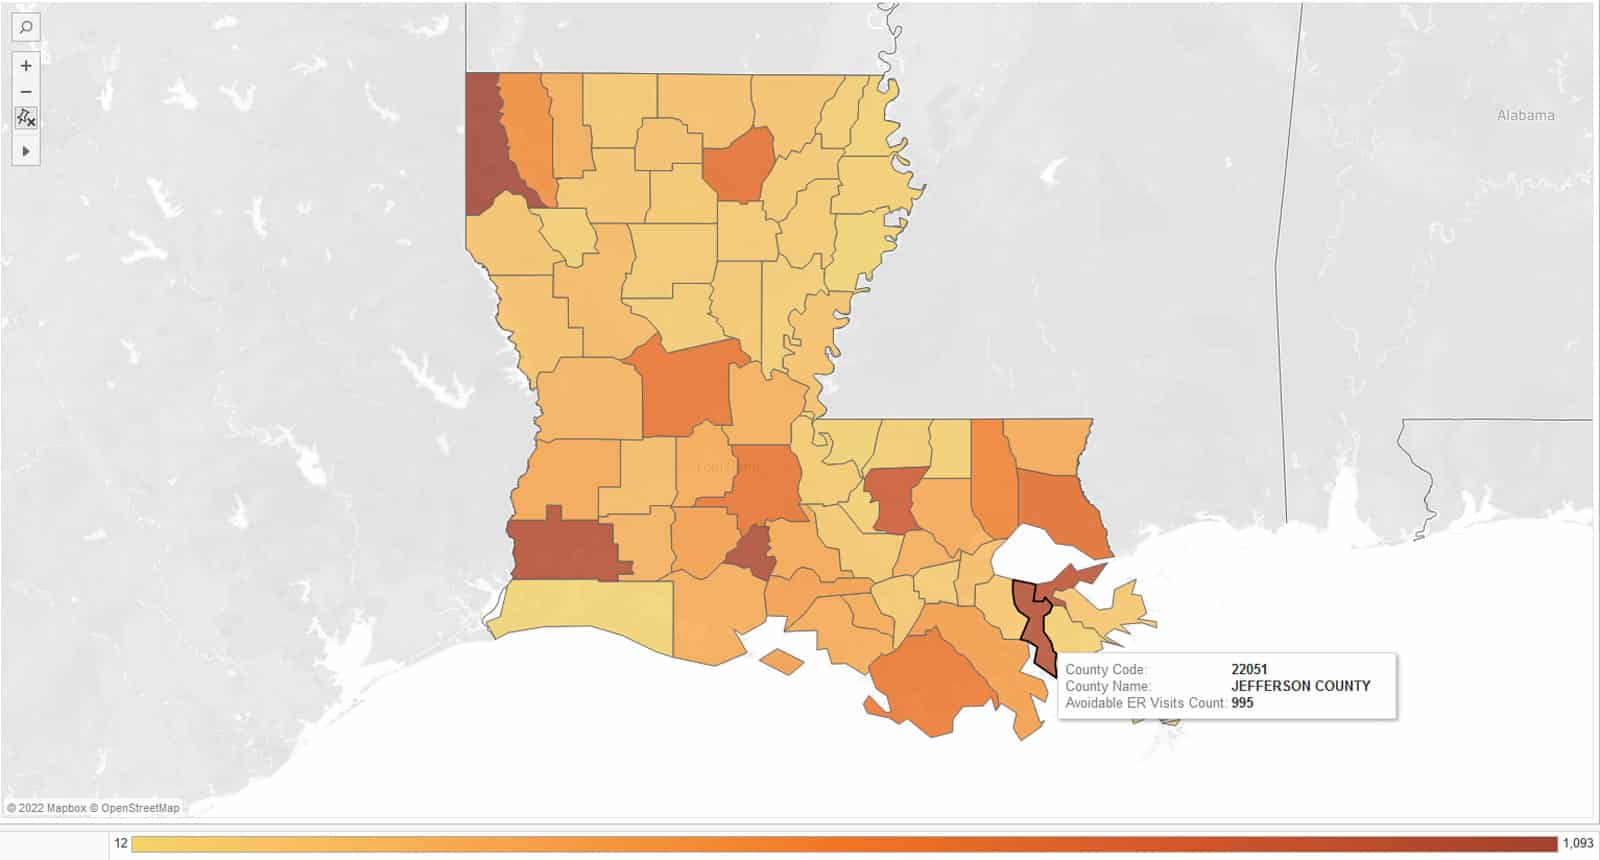 Avoidable ER Visits Count by Louisiana County